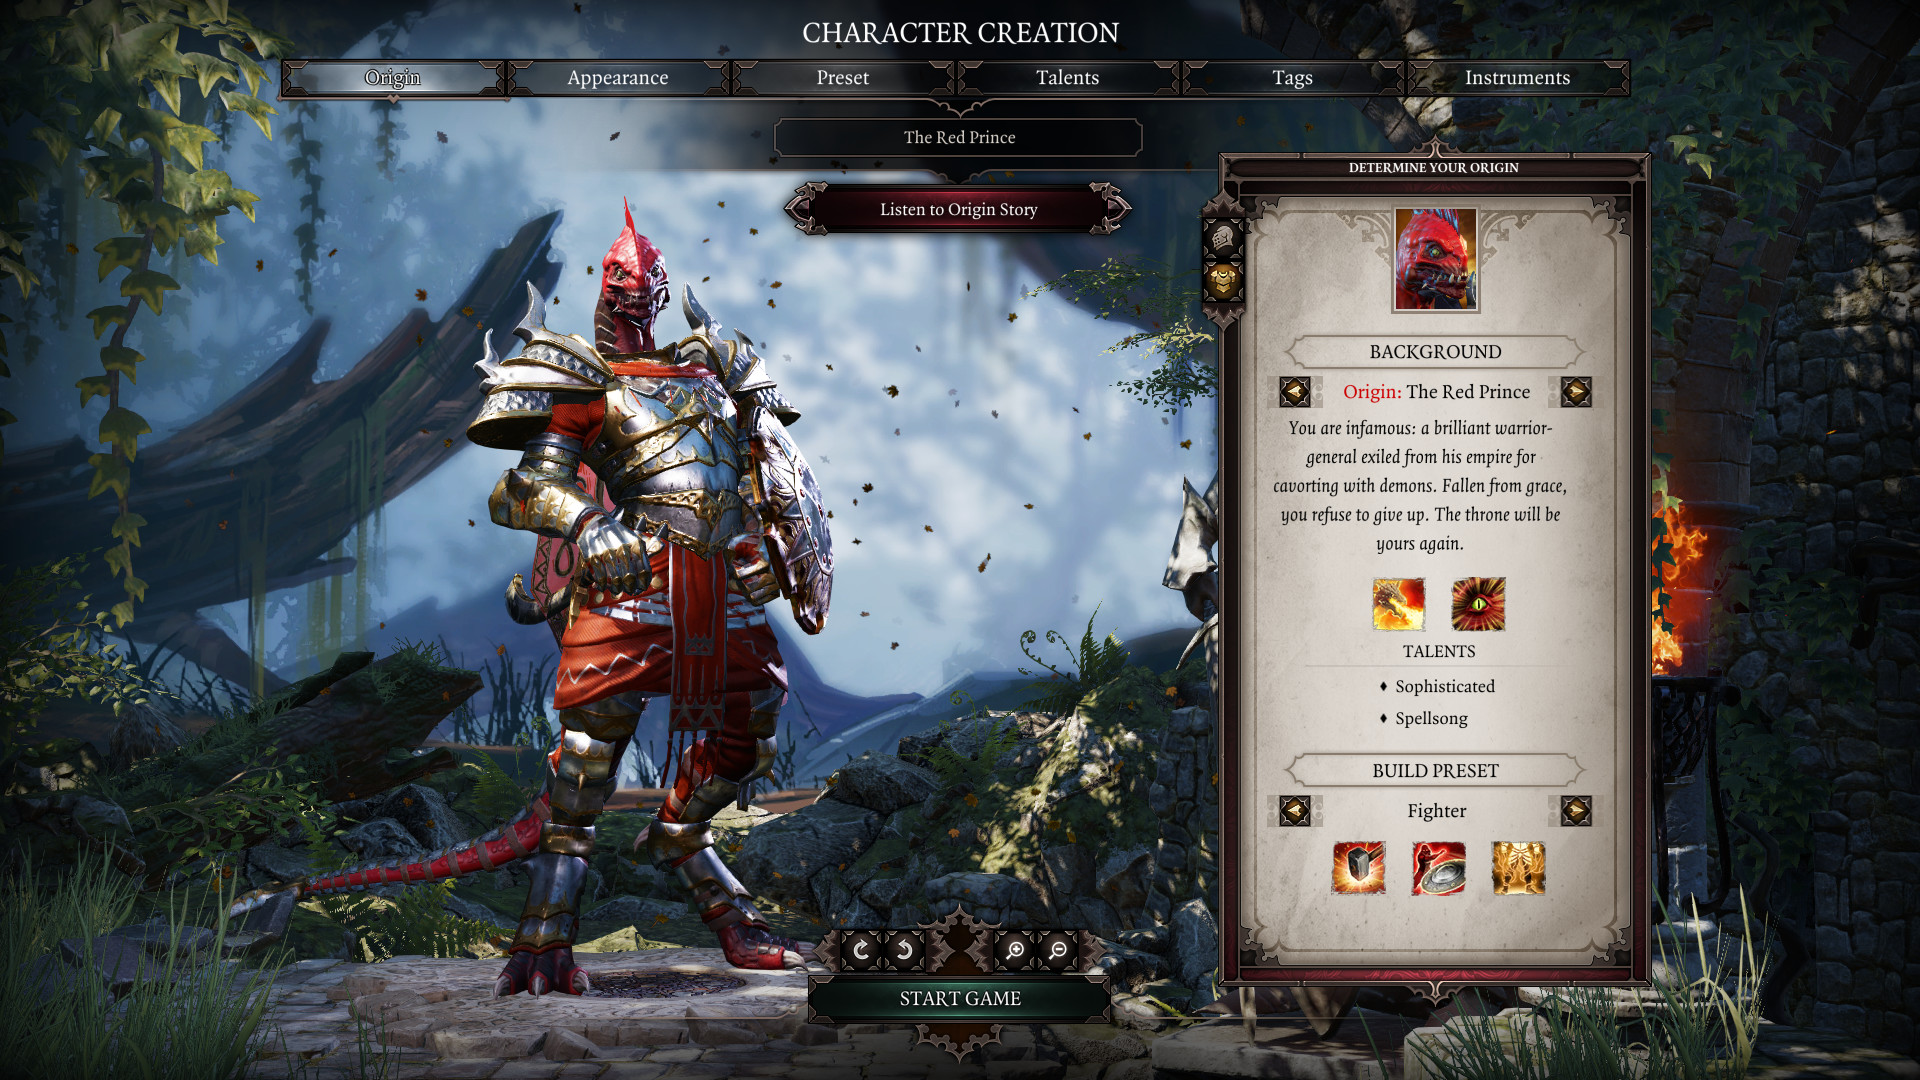 divinity 2 patch 1.4.9.70